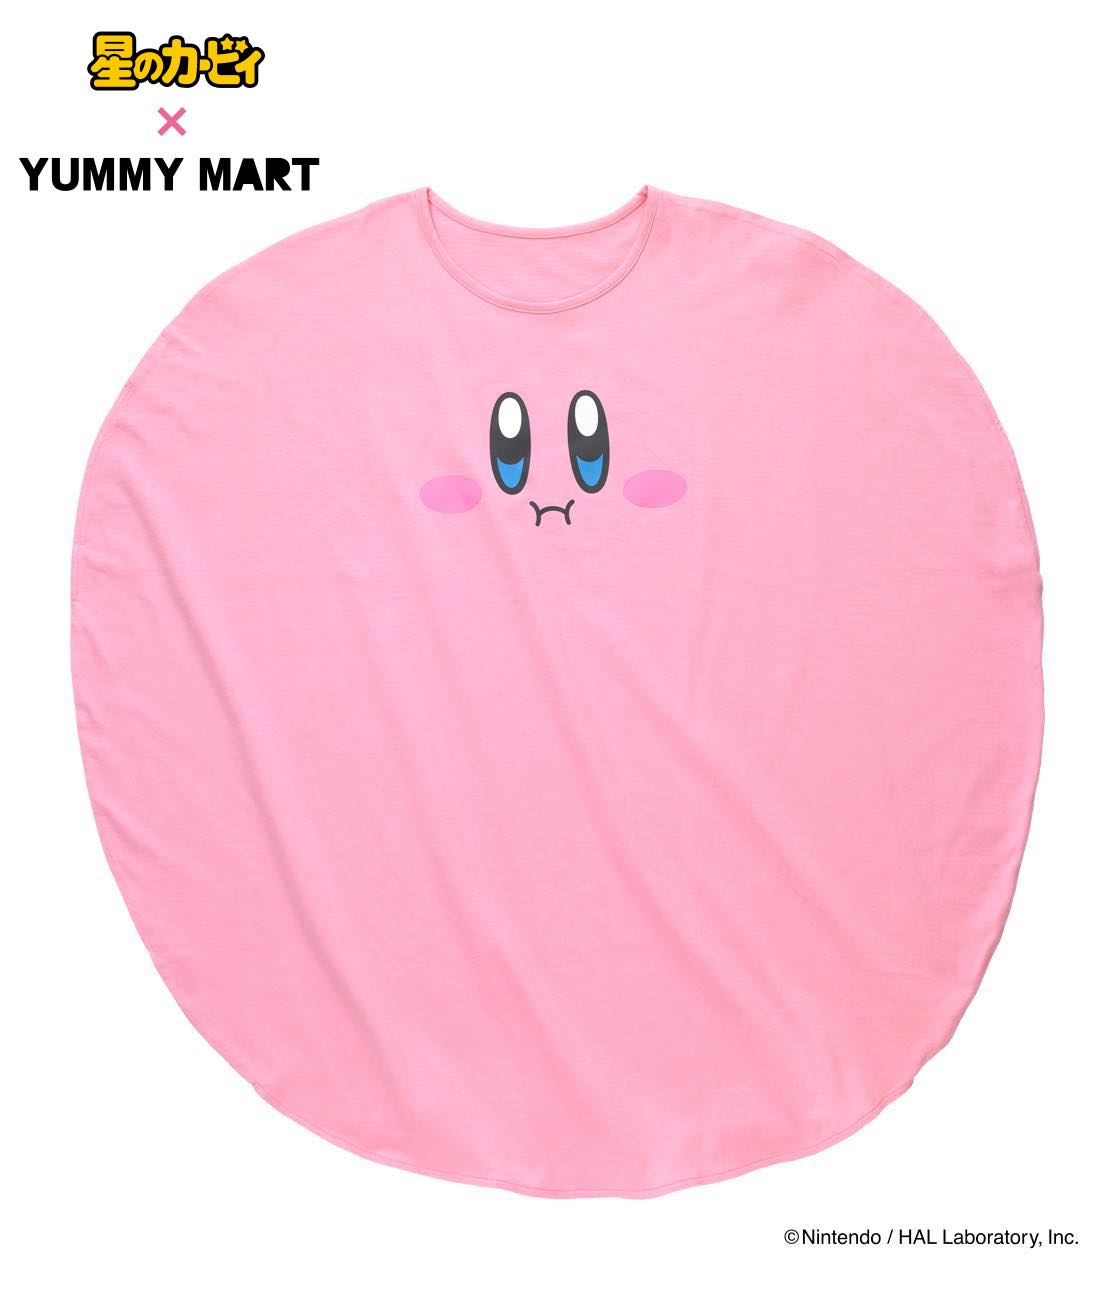 A Better Designed Kirby Dress Is Impossible